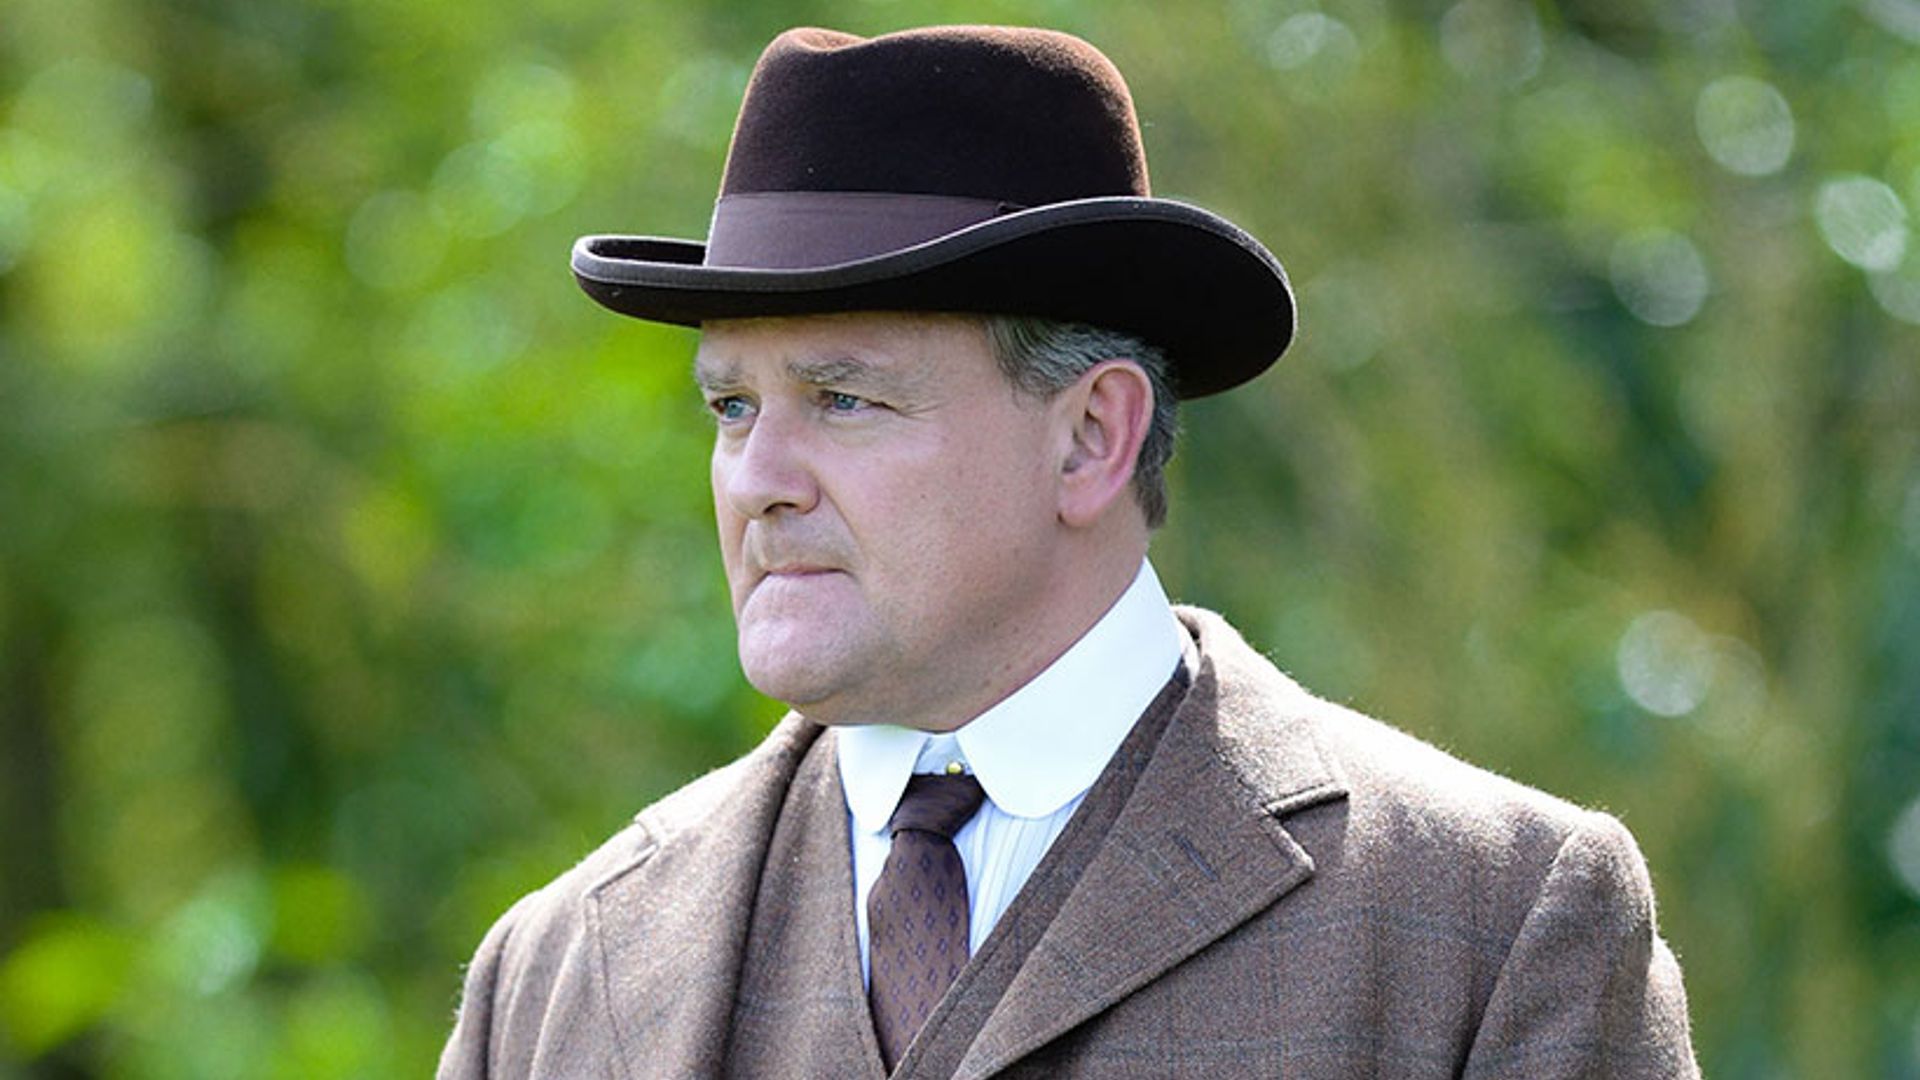 Downton Abbey fans wowed by Hugh Bonneville's new look - see photo